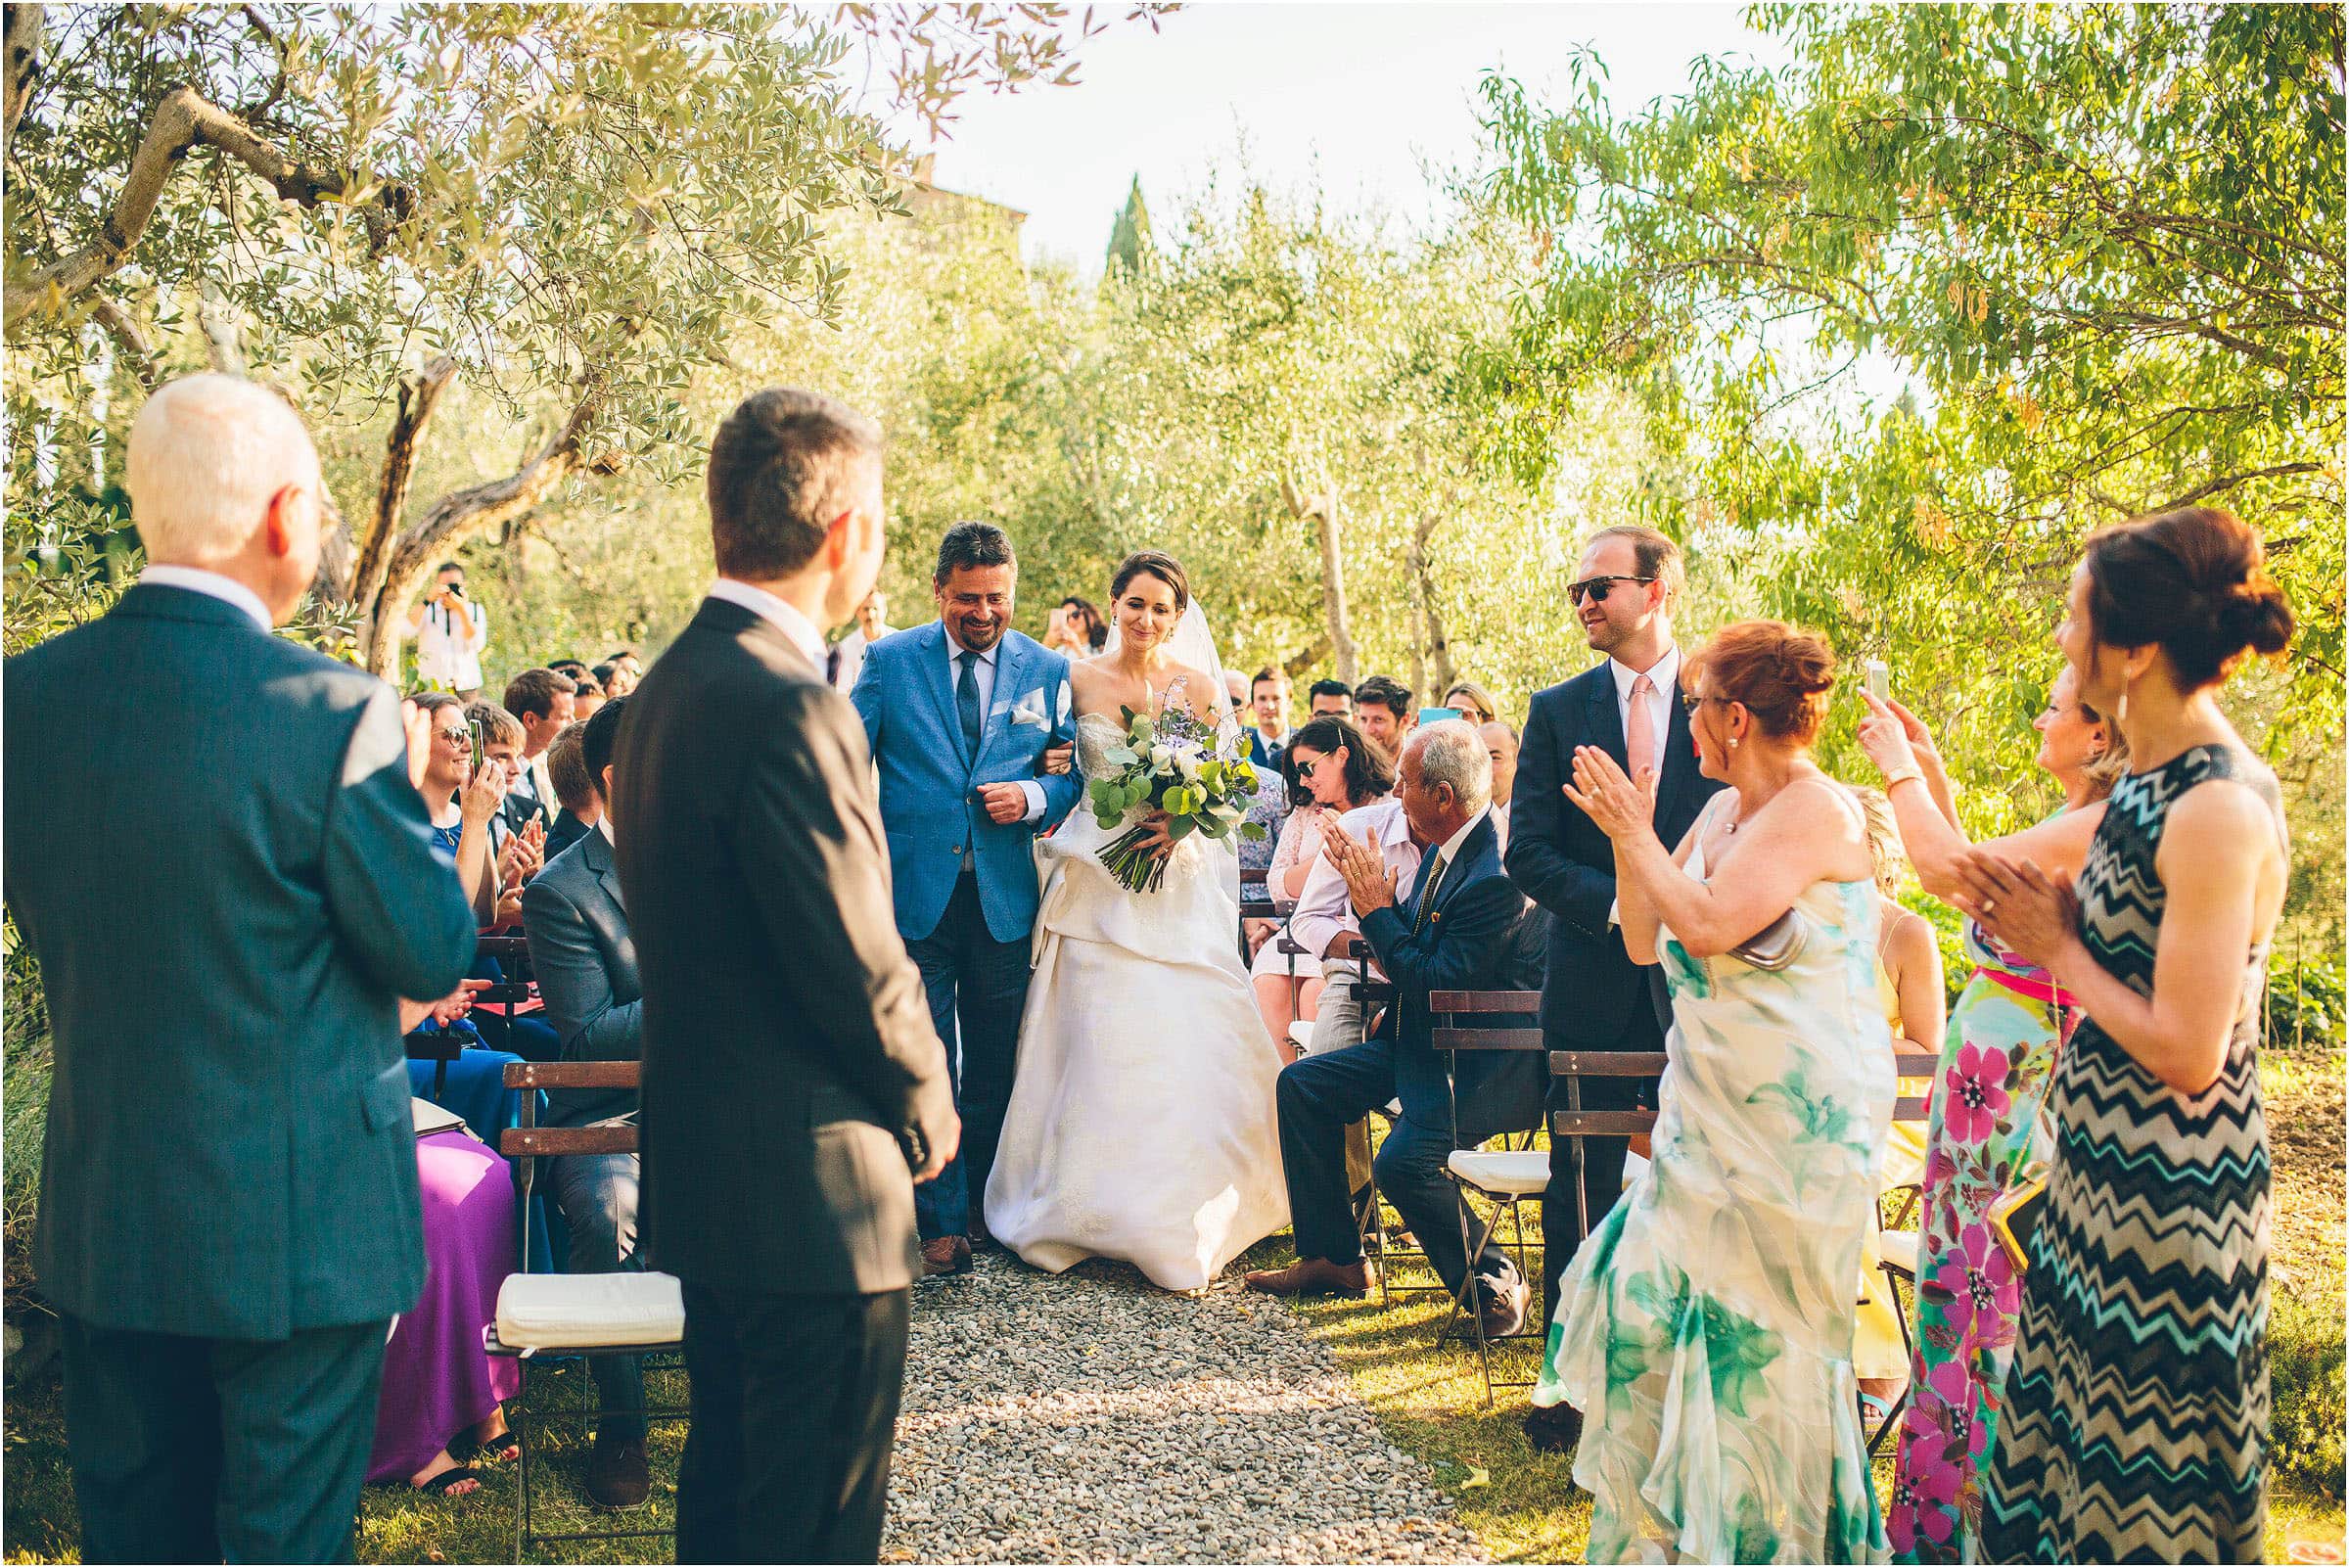 The bride makes her way down the aisle at Castello di Vicarello in Tuscany as her groom stands and watches